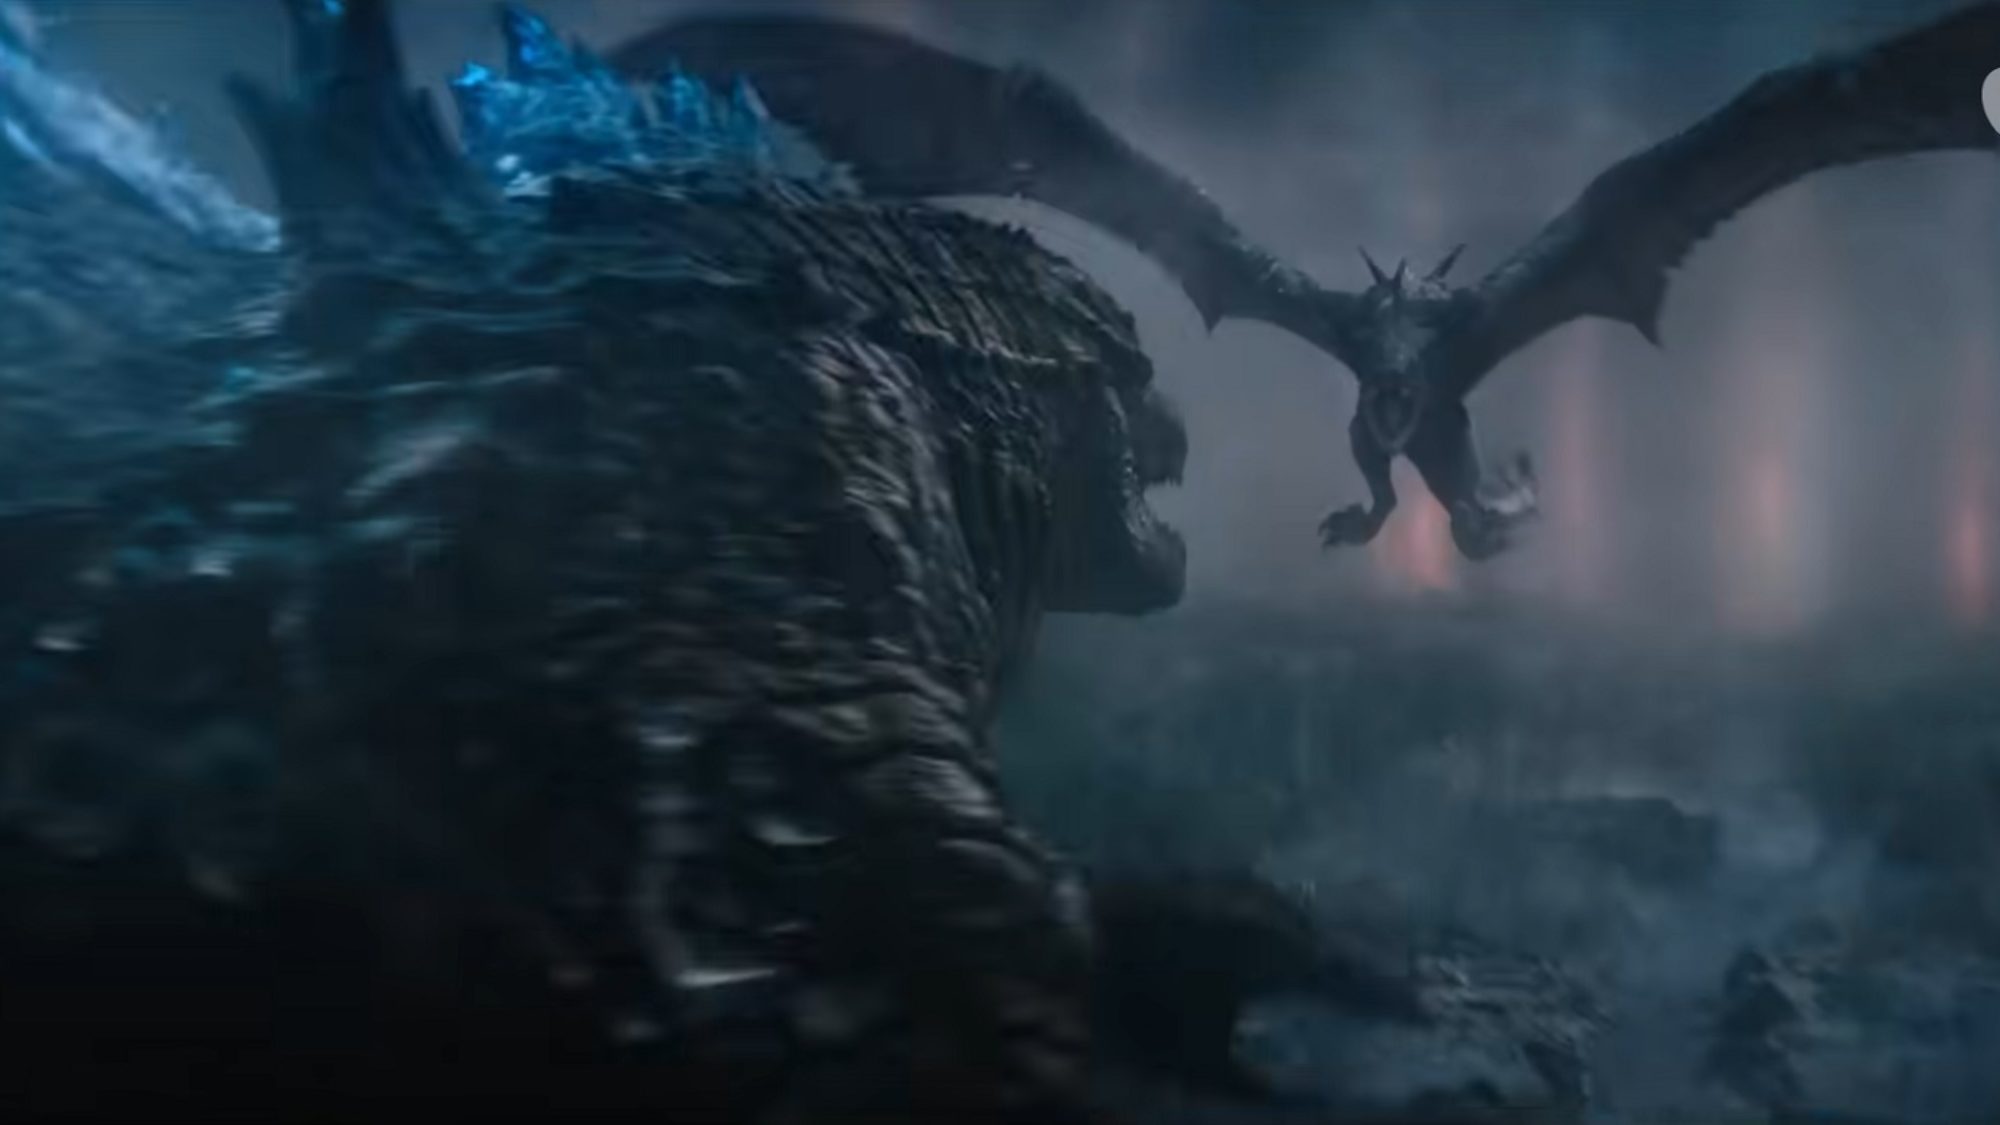 Legacy of Monsters Trailer Teases Serious Godzilla Action